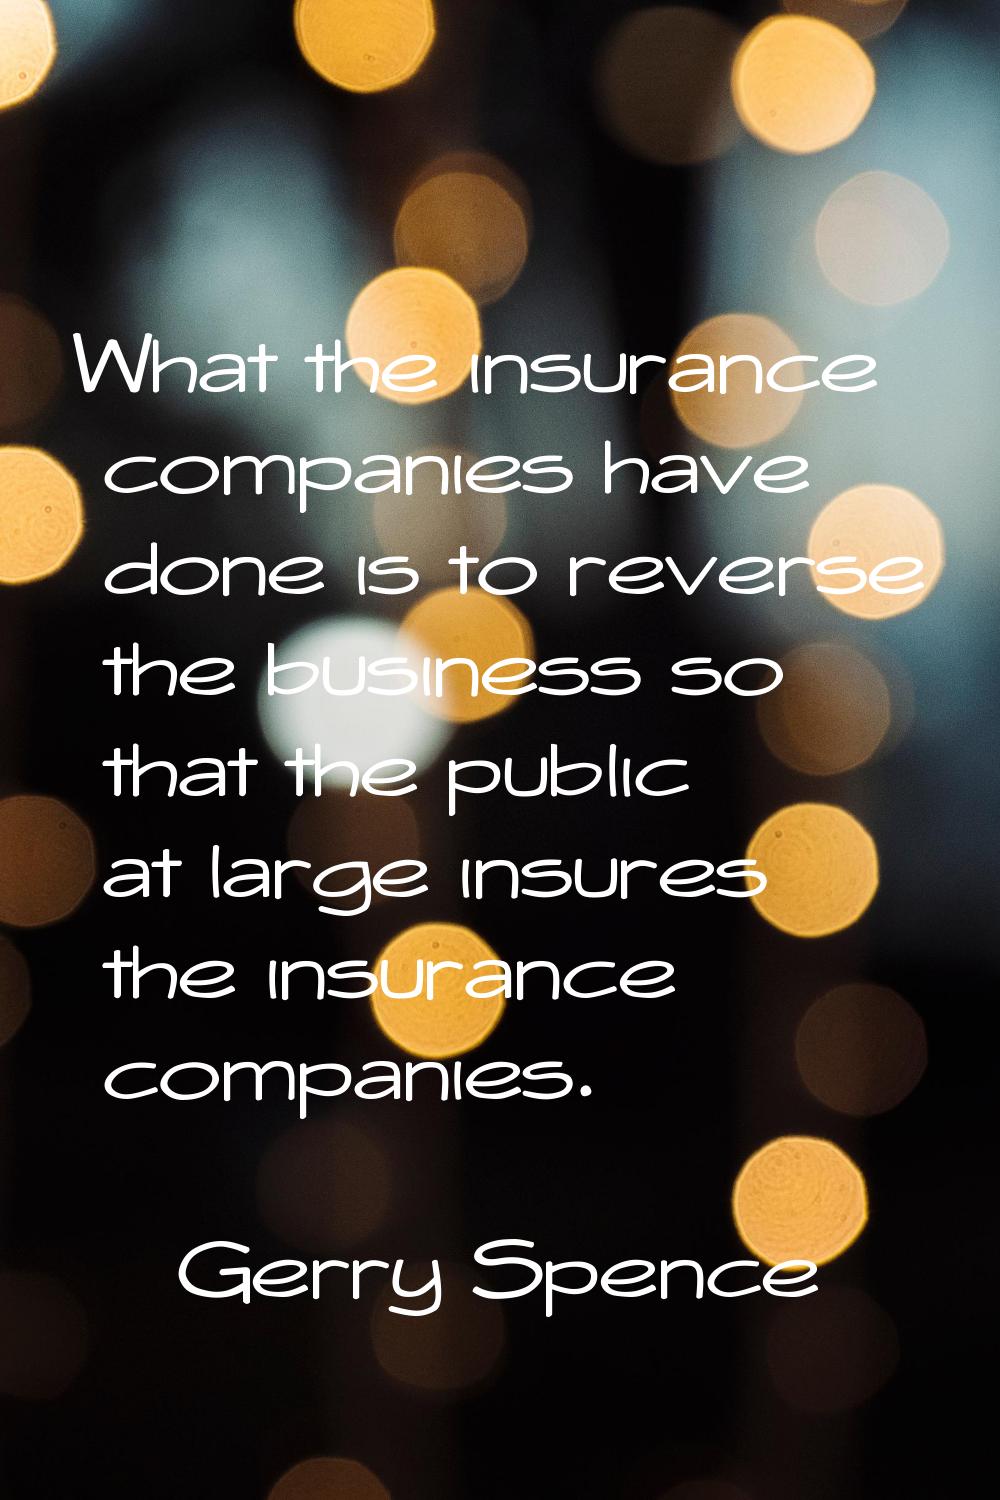 What the insurance companies have done is to reverse the business so that the public at large insur